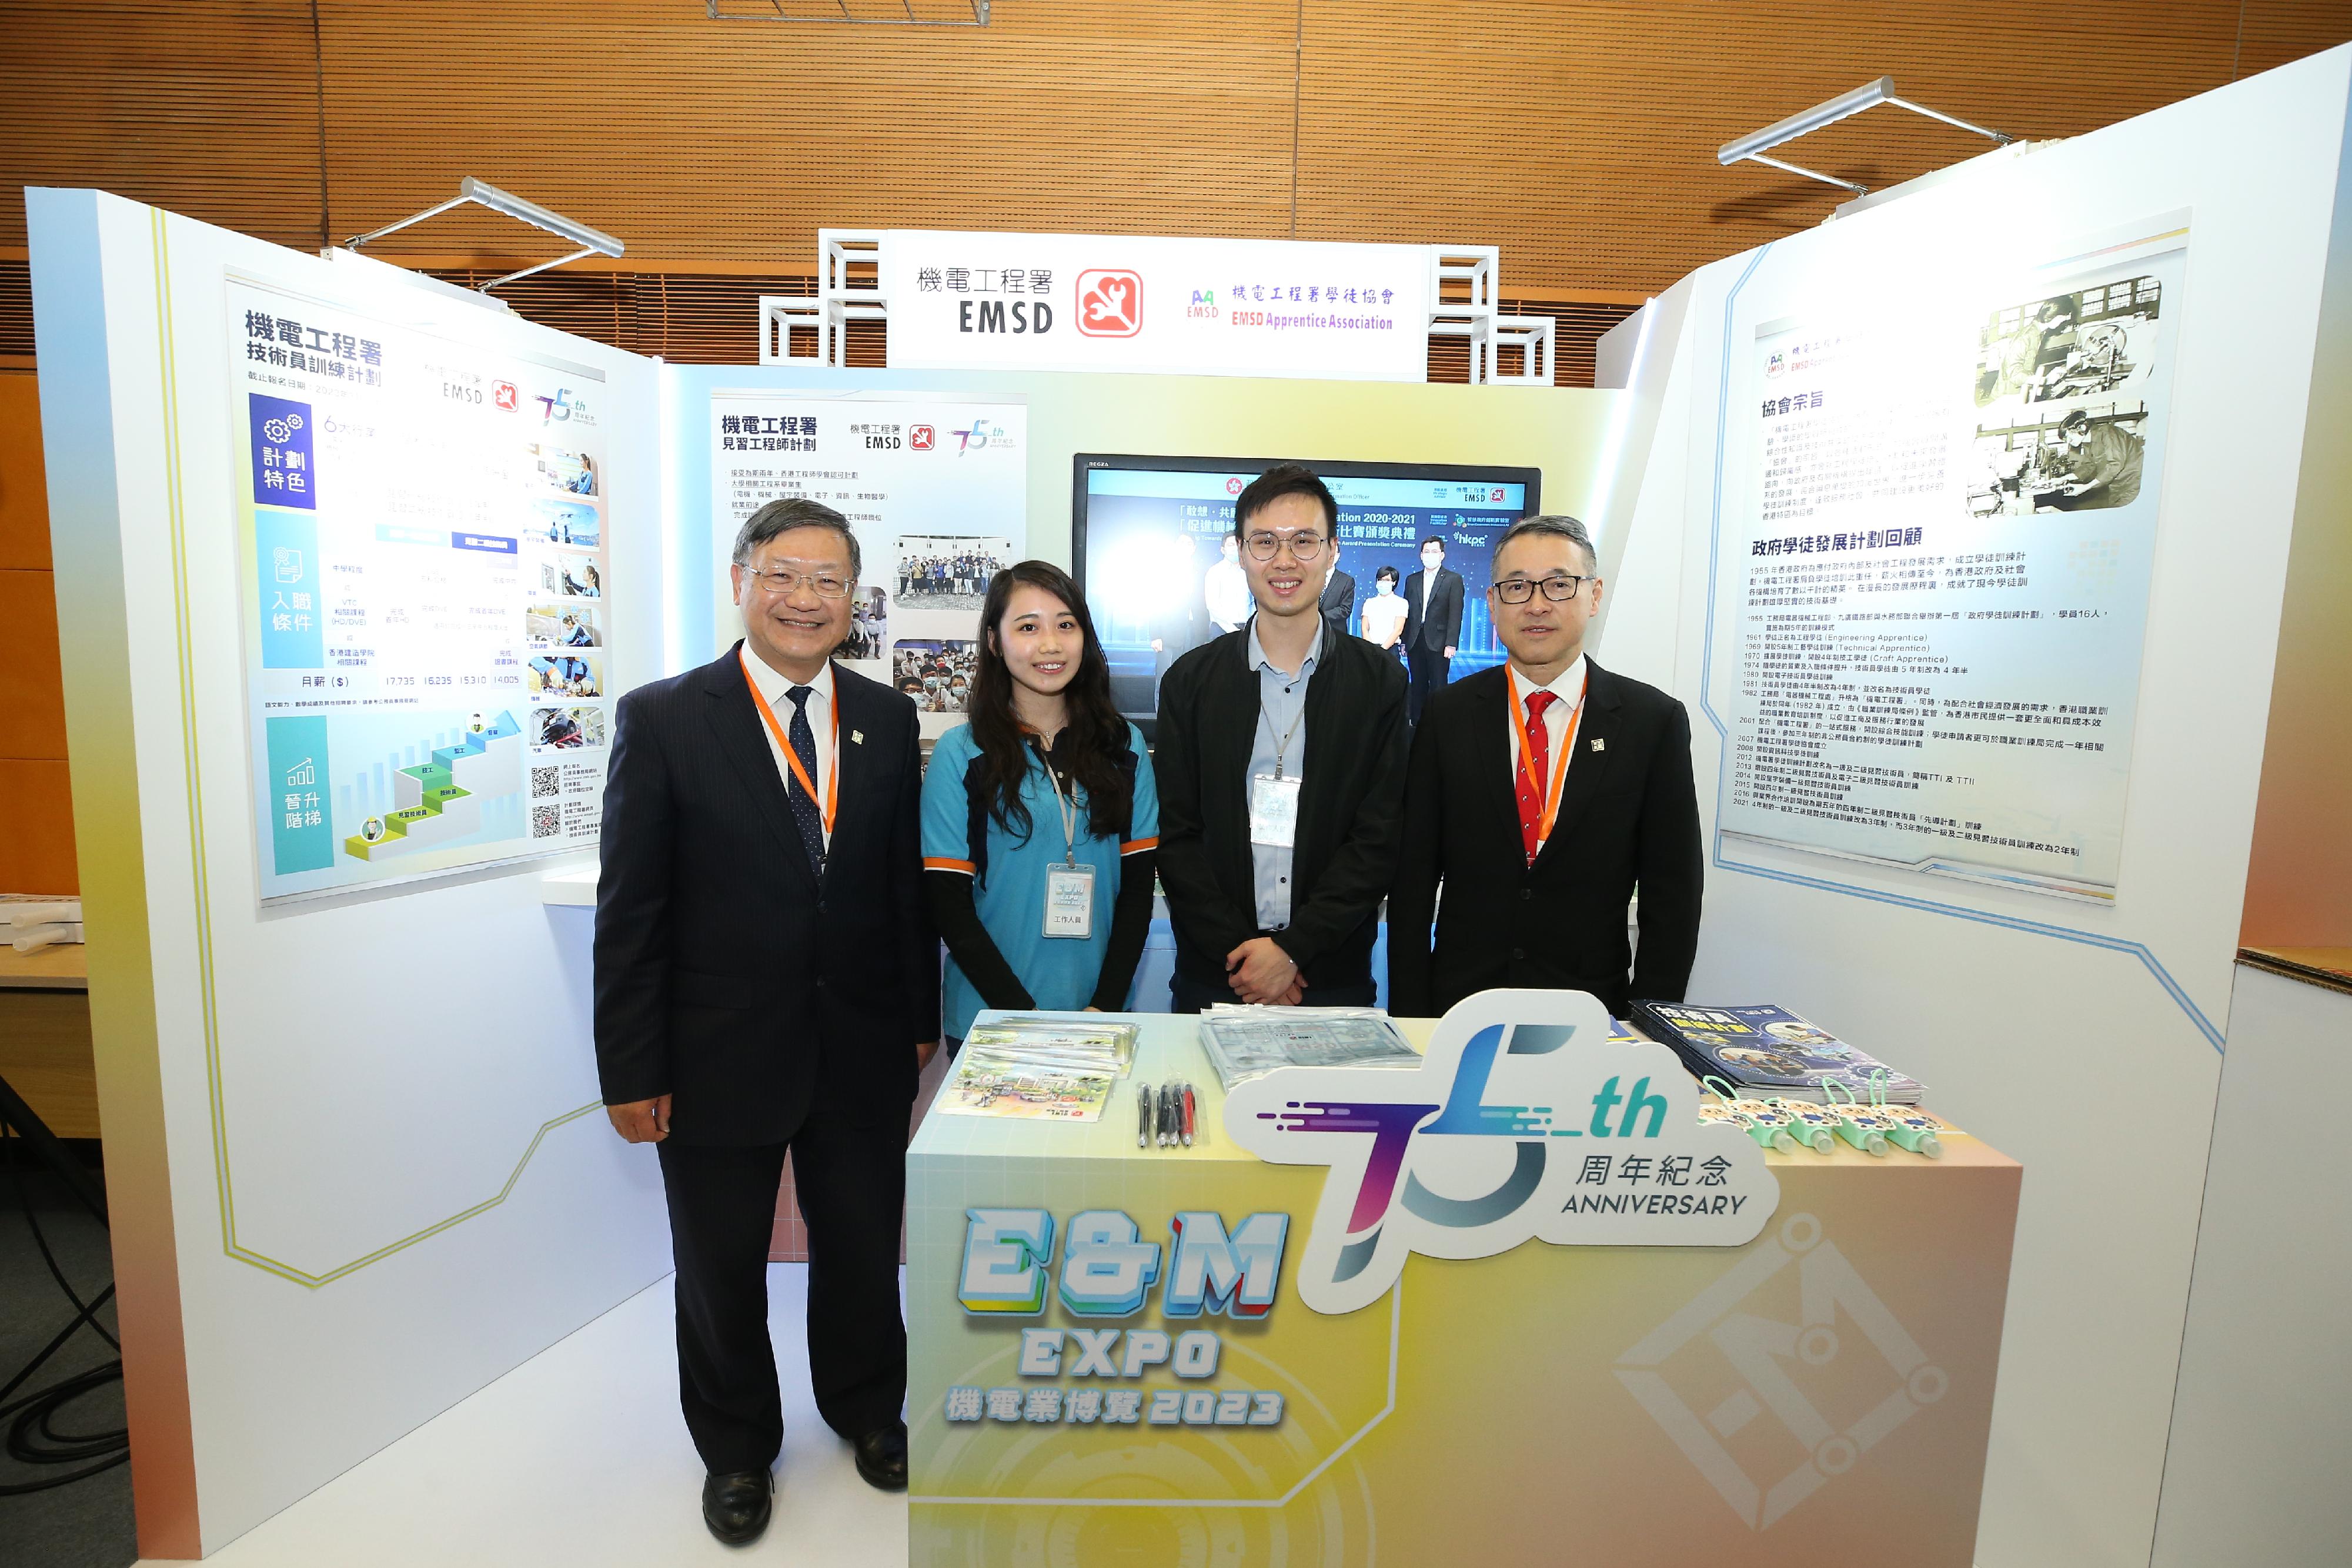 The Electrical and Mechanical Services Department and the Hong Kong Electrical and Mechanical Trade Promotion Working Group today (March 3) jointly held the Electrical and Mechanical Expo 2023. Photo shows the Director of Electrical and Mechanical Services, Mr Eric Pang (first left), visiting an exhibition booth.